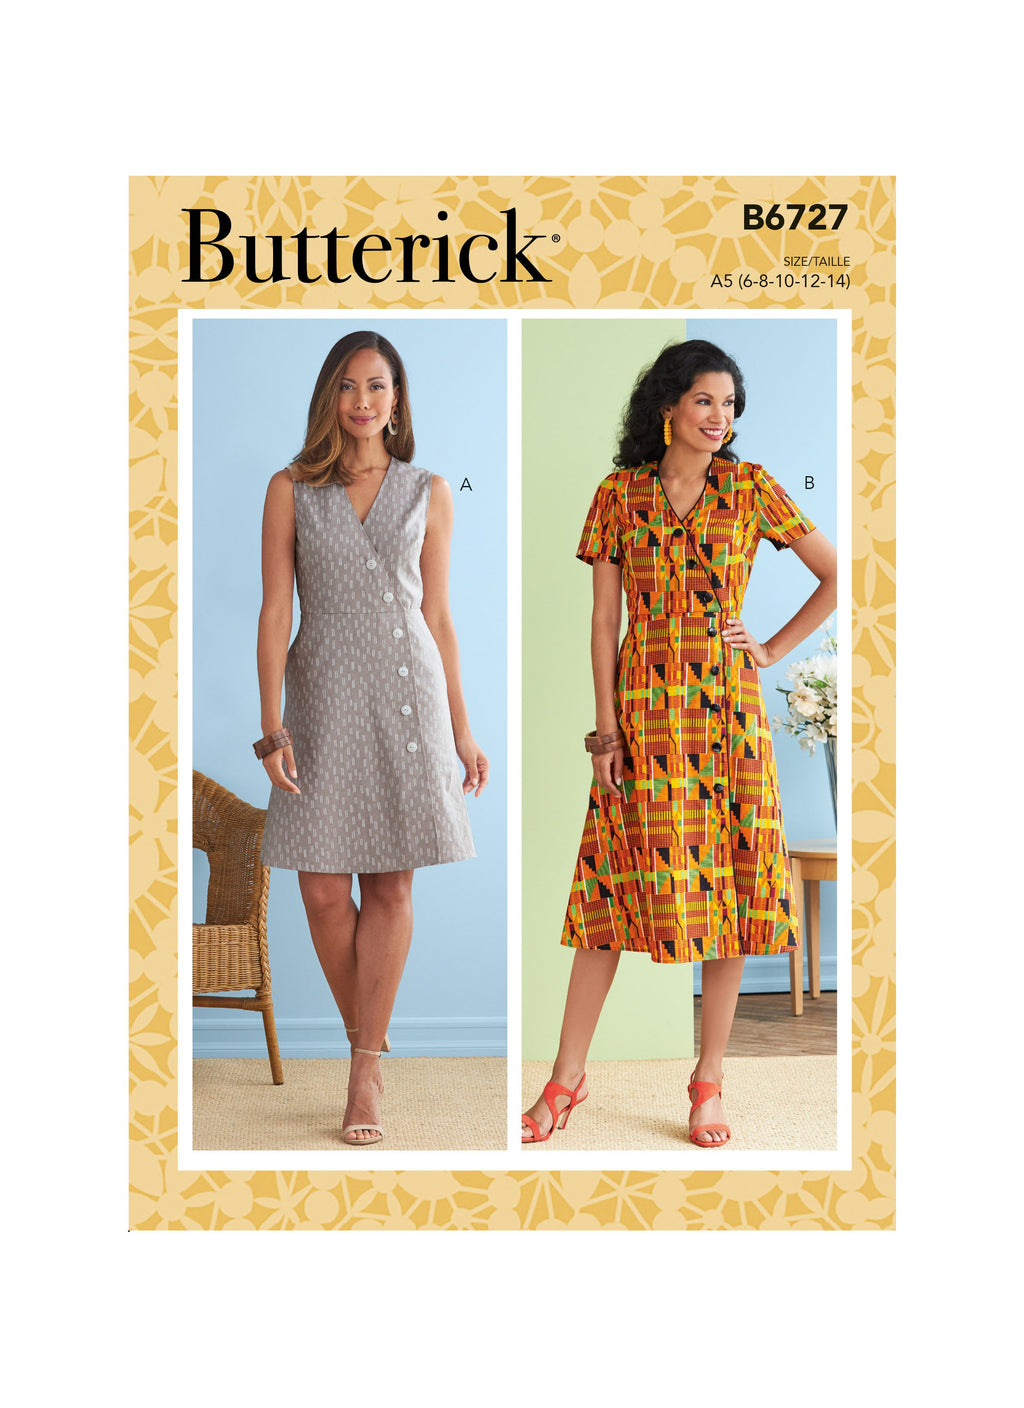 Butterick Sewing Pattern 6727 Misses' Dresses